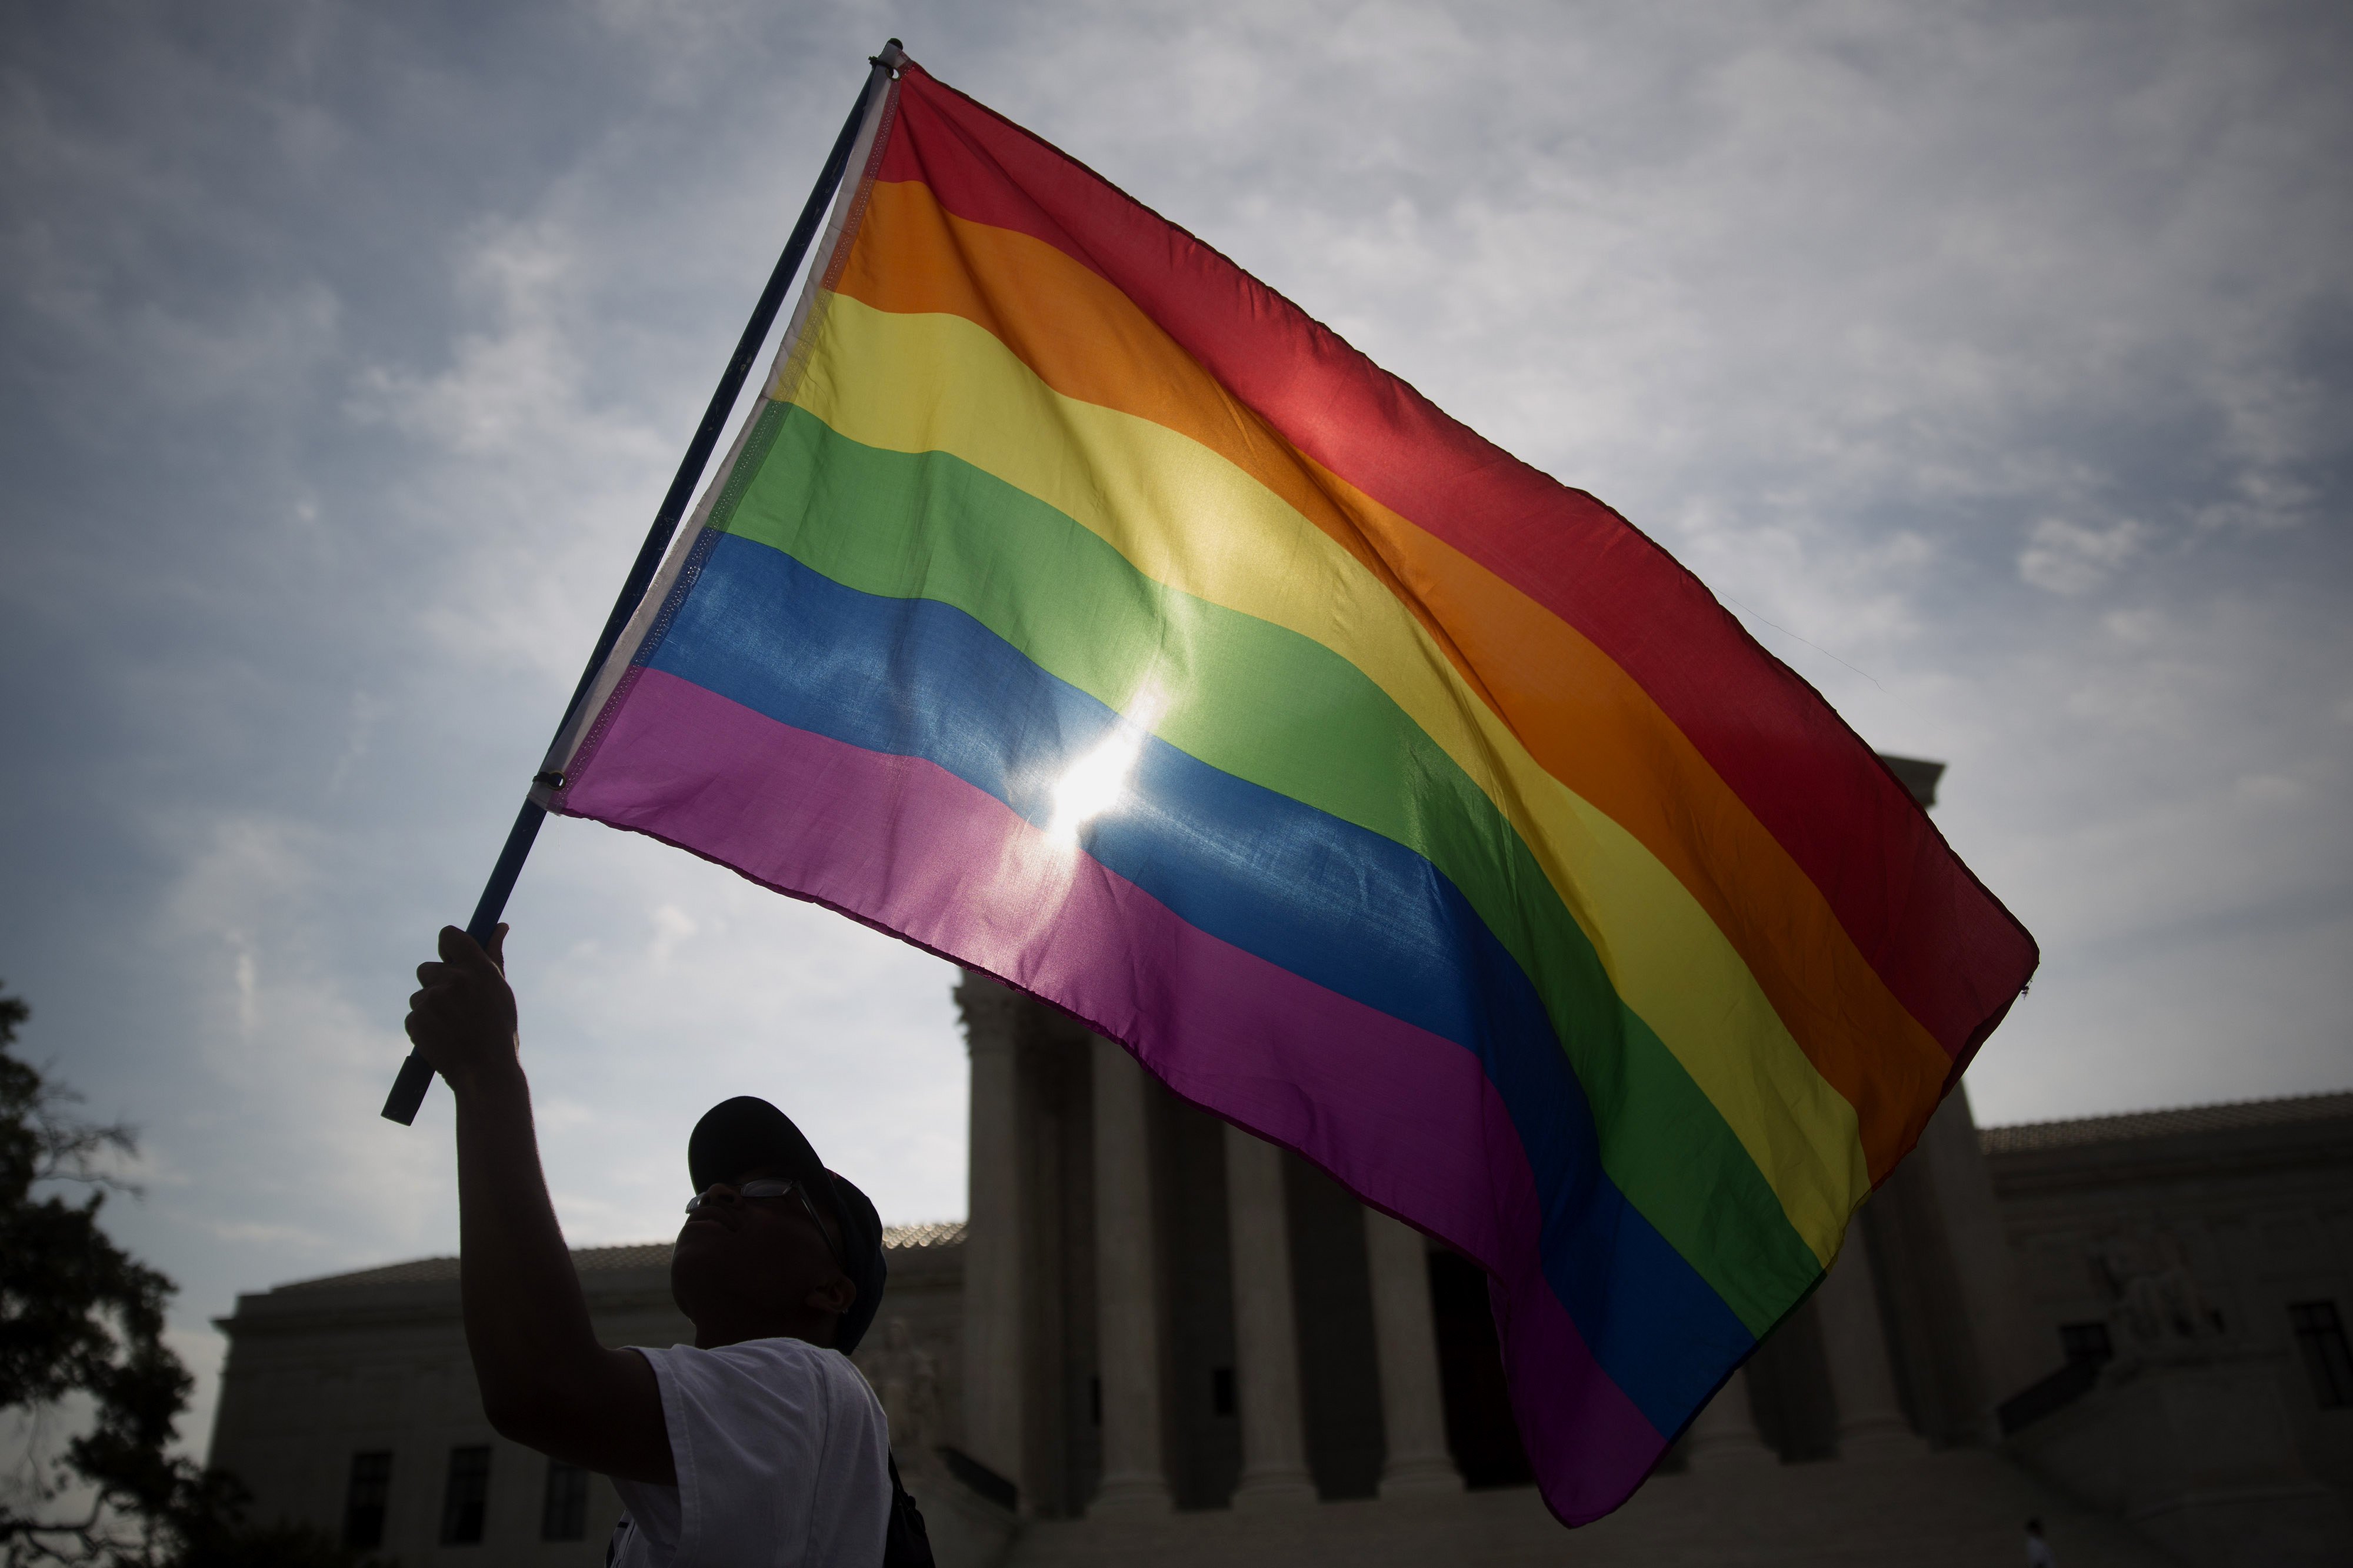 Carlos McKnight, from Washington, D.C., waves a rainbow colored flag outside the U.S. Supreme Court in Washington, D.C., U.S., on Friday, June 26, 2015. (Andrew Harrer— 2015 Bloomberg Finance LP/Getty Images)